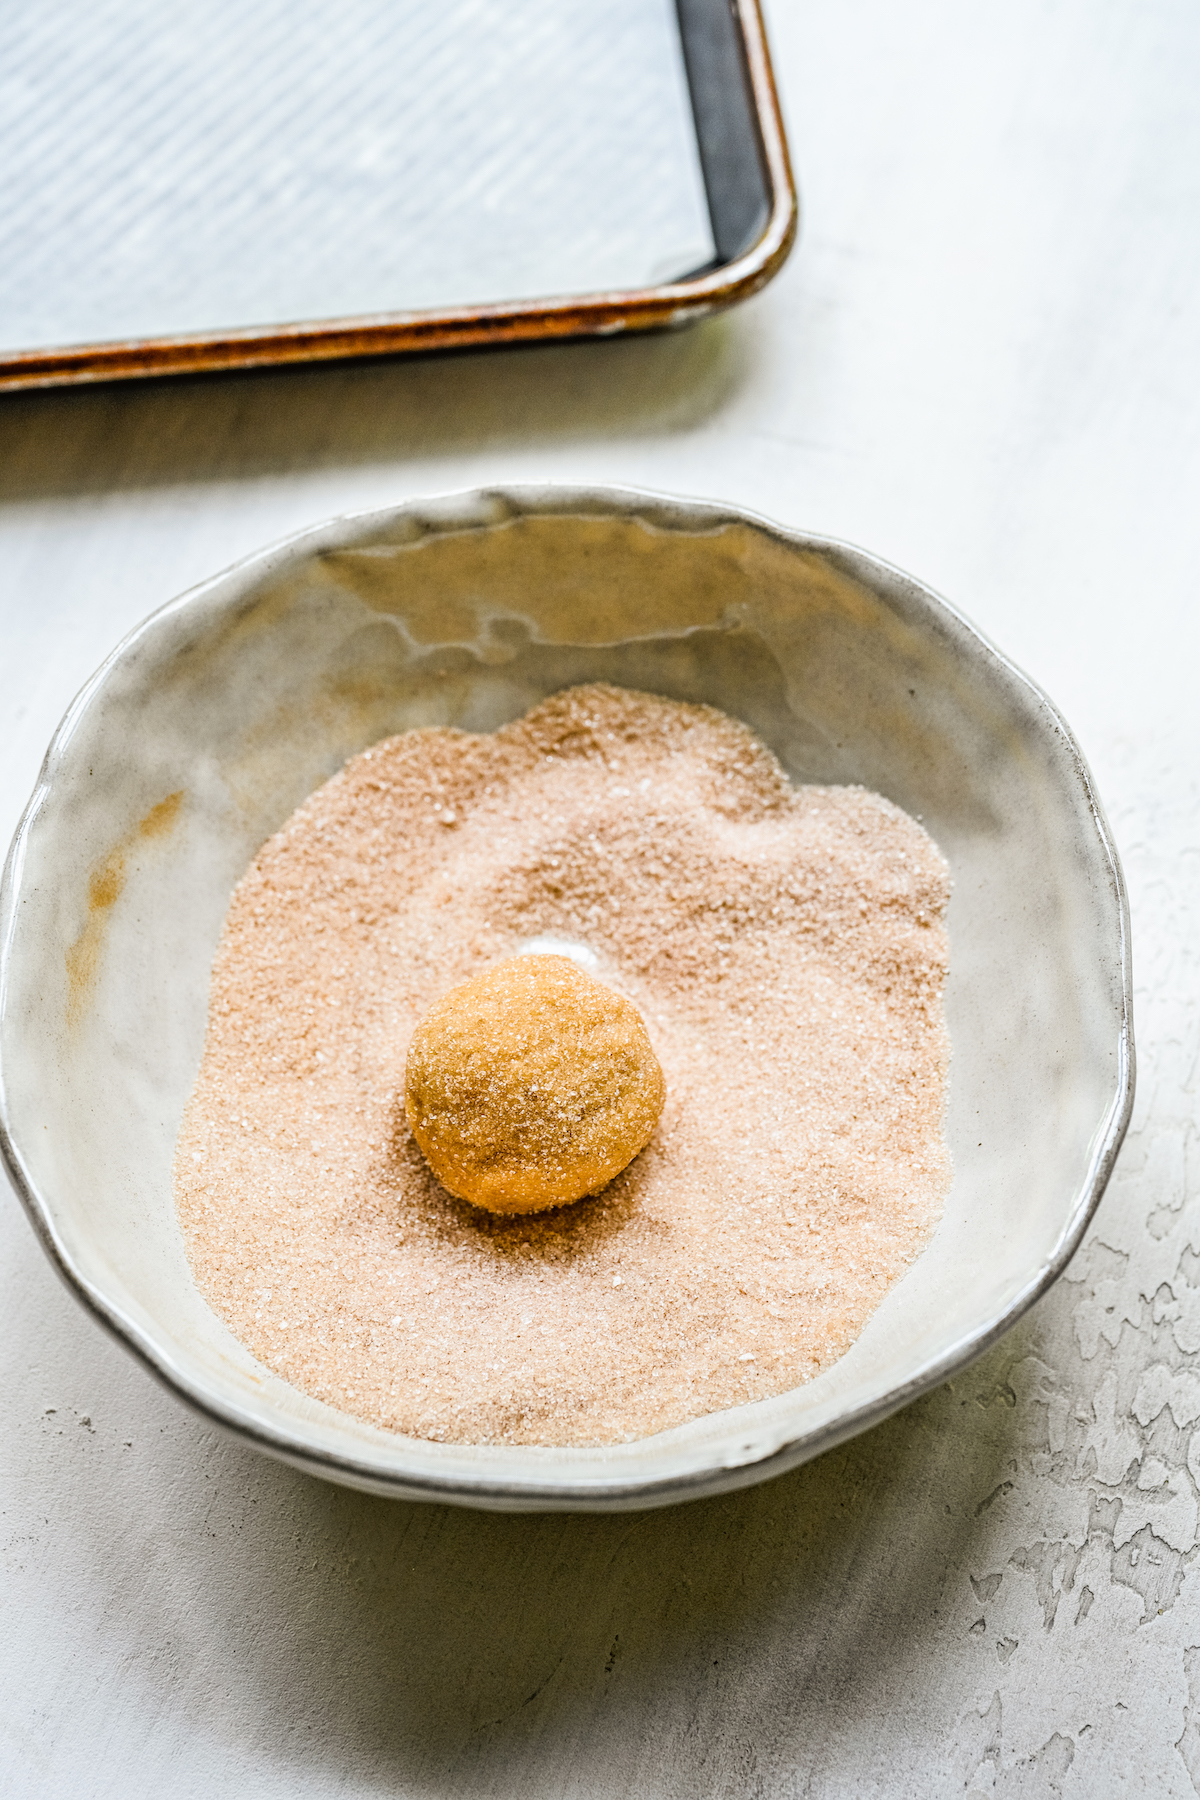 A ball of golden-brown cookie dough in a dish of cinnamon sugar.